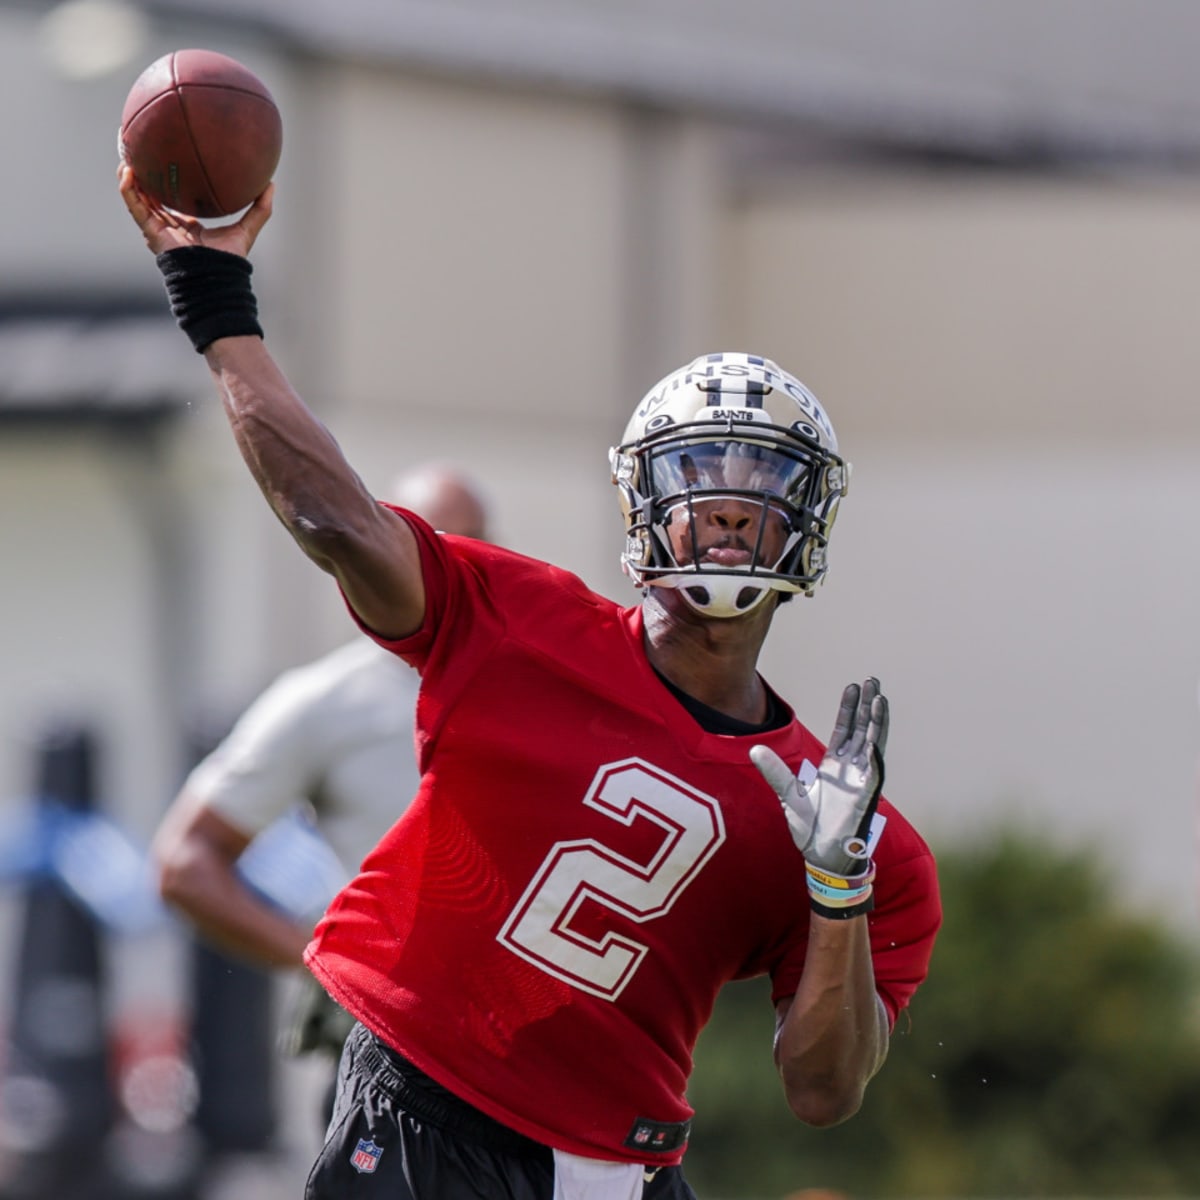 Saints vs. Texans 2022 Preseason: TV Schedule, Online Streaming, Radio,  Mobile, and Odds - Canal Street Chronicles